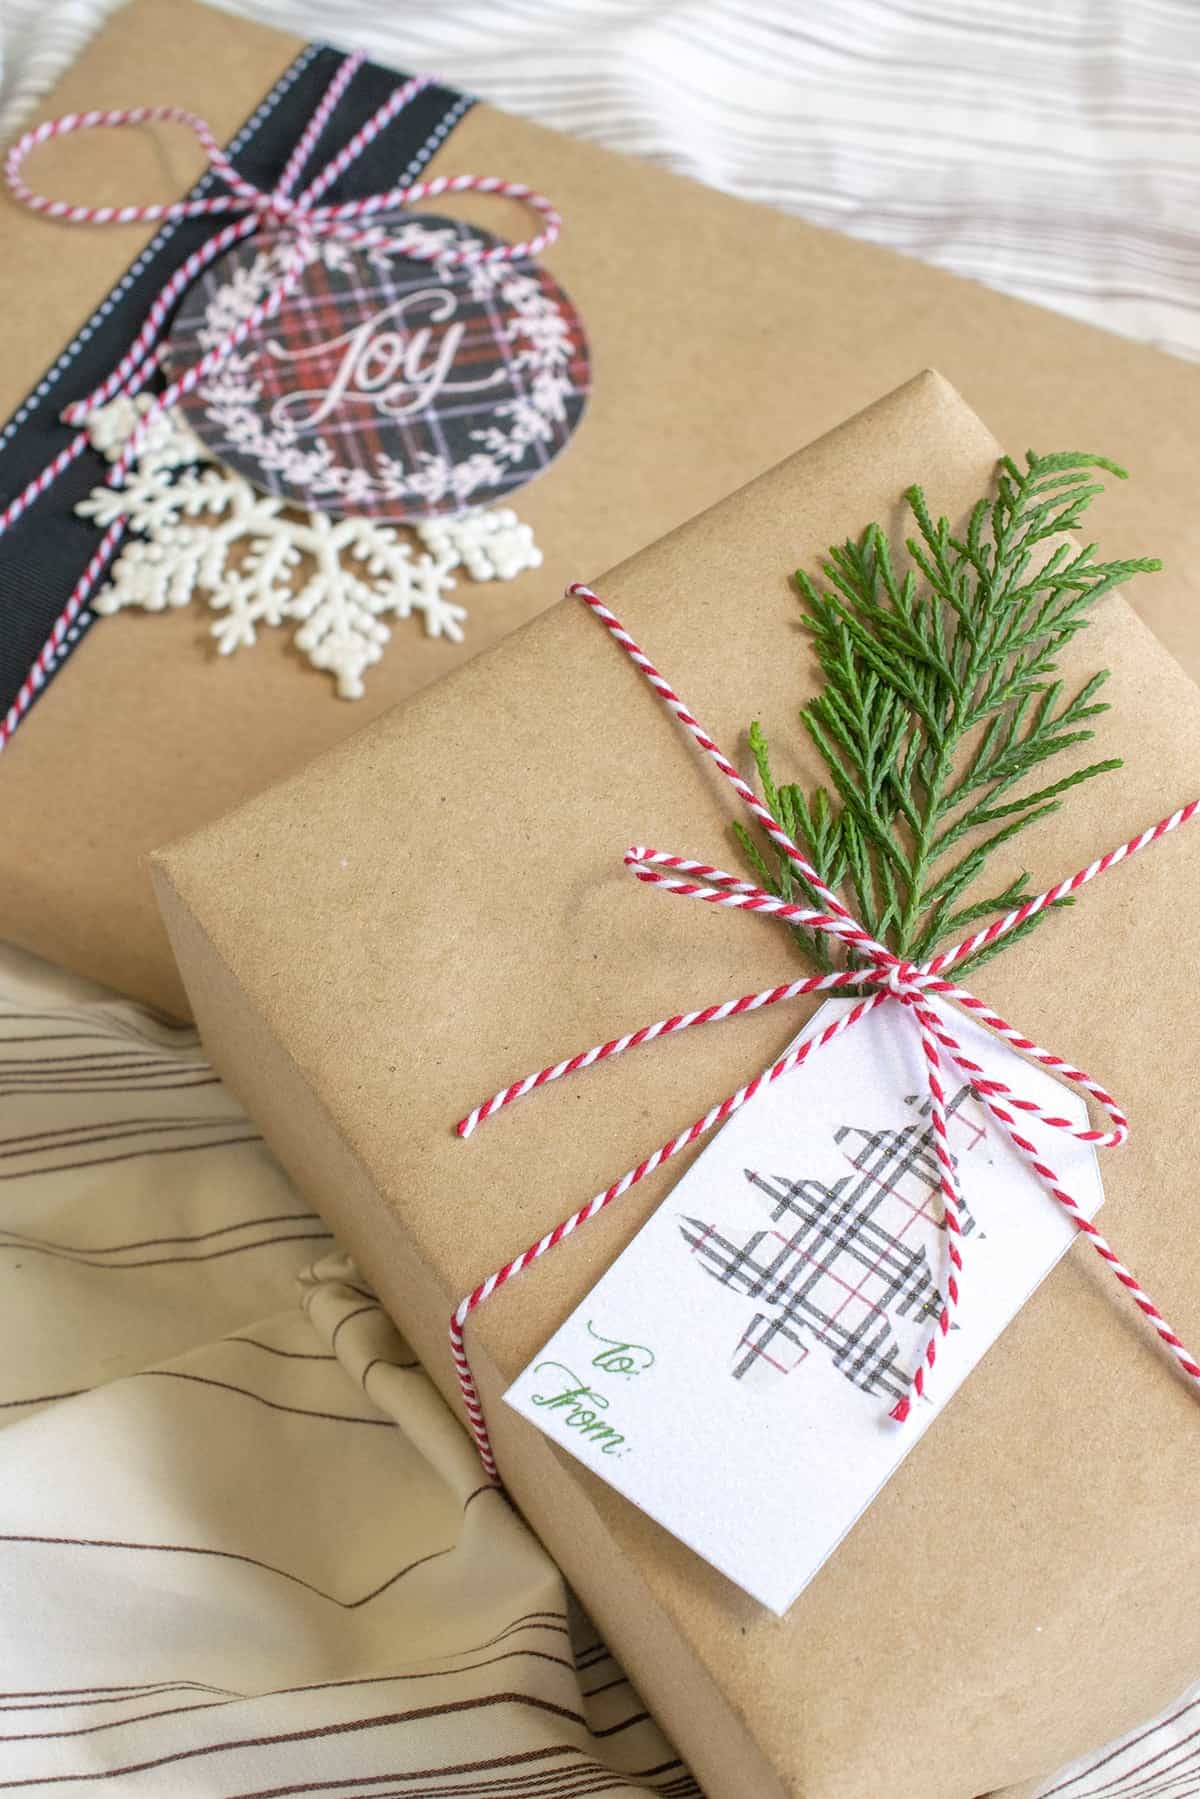 2 Christmas gifts wrapped in brown paper with red and white string, plaid ribbon and tag, snowflake tag, and green stacked on striped sheet. 